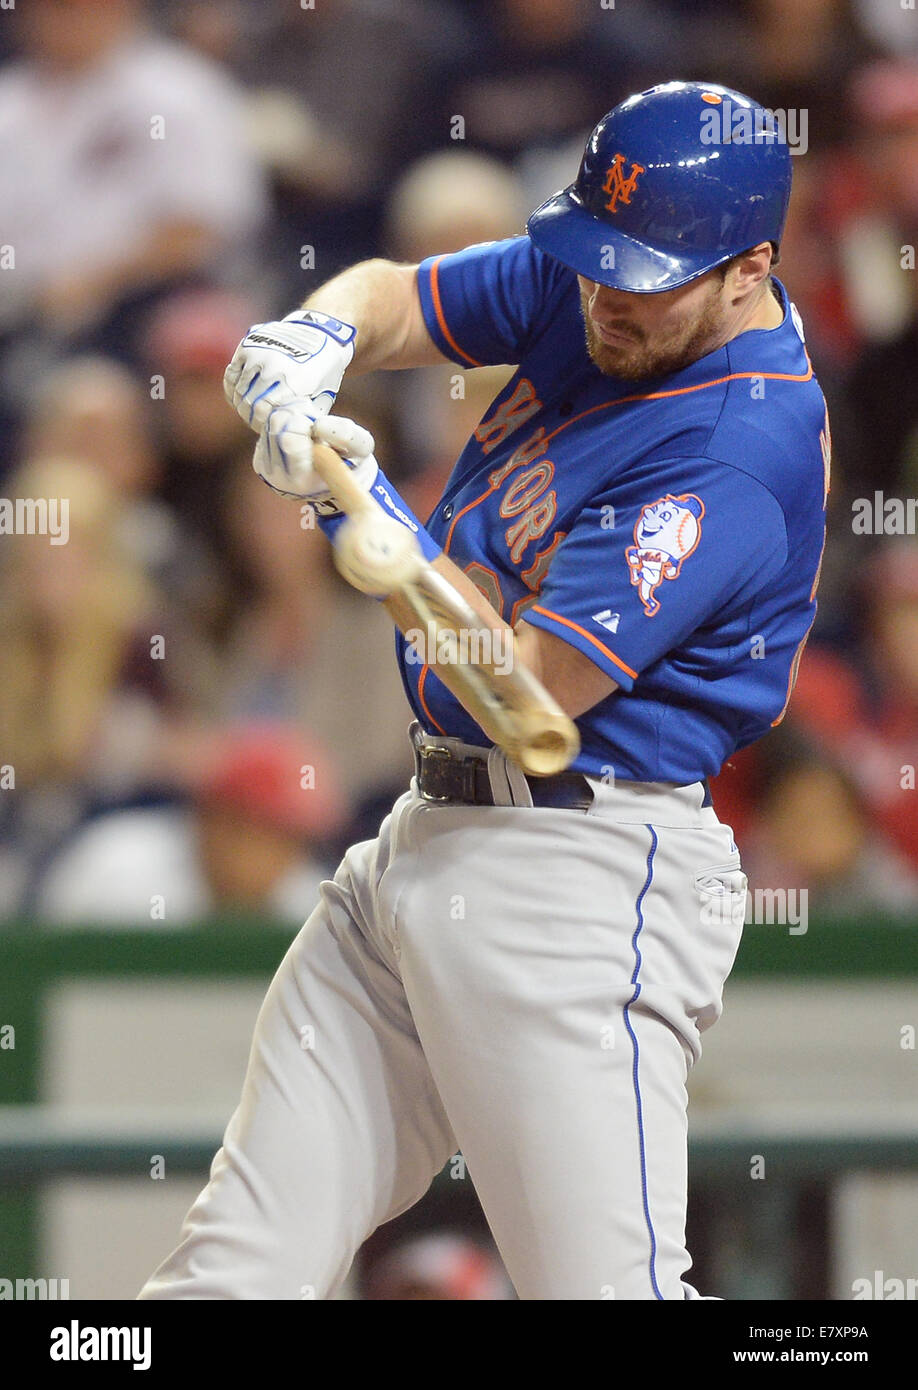 Washington, DC, USA. 25th Sep, 2014.  New York Mets third baseman Daniel Murphy (28) singles against the Washington Nationals in the first inning of the second game of a doubleheader at Nationals Park in Washington. The Nationals beat the Mets, 3-0. Credit:  ZUMA Press, Inc./Alamy Live News Stock Photo